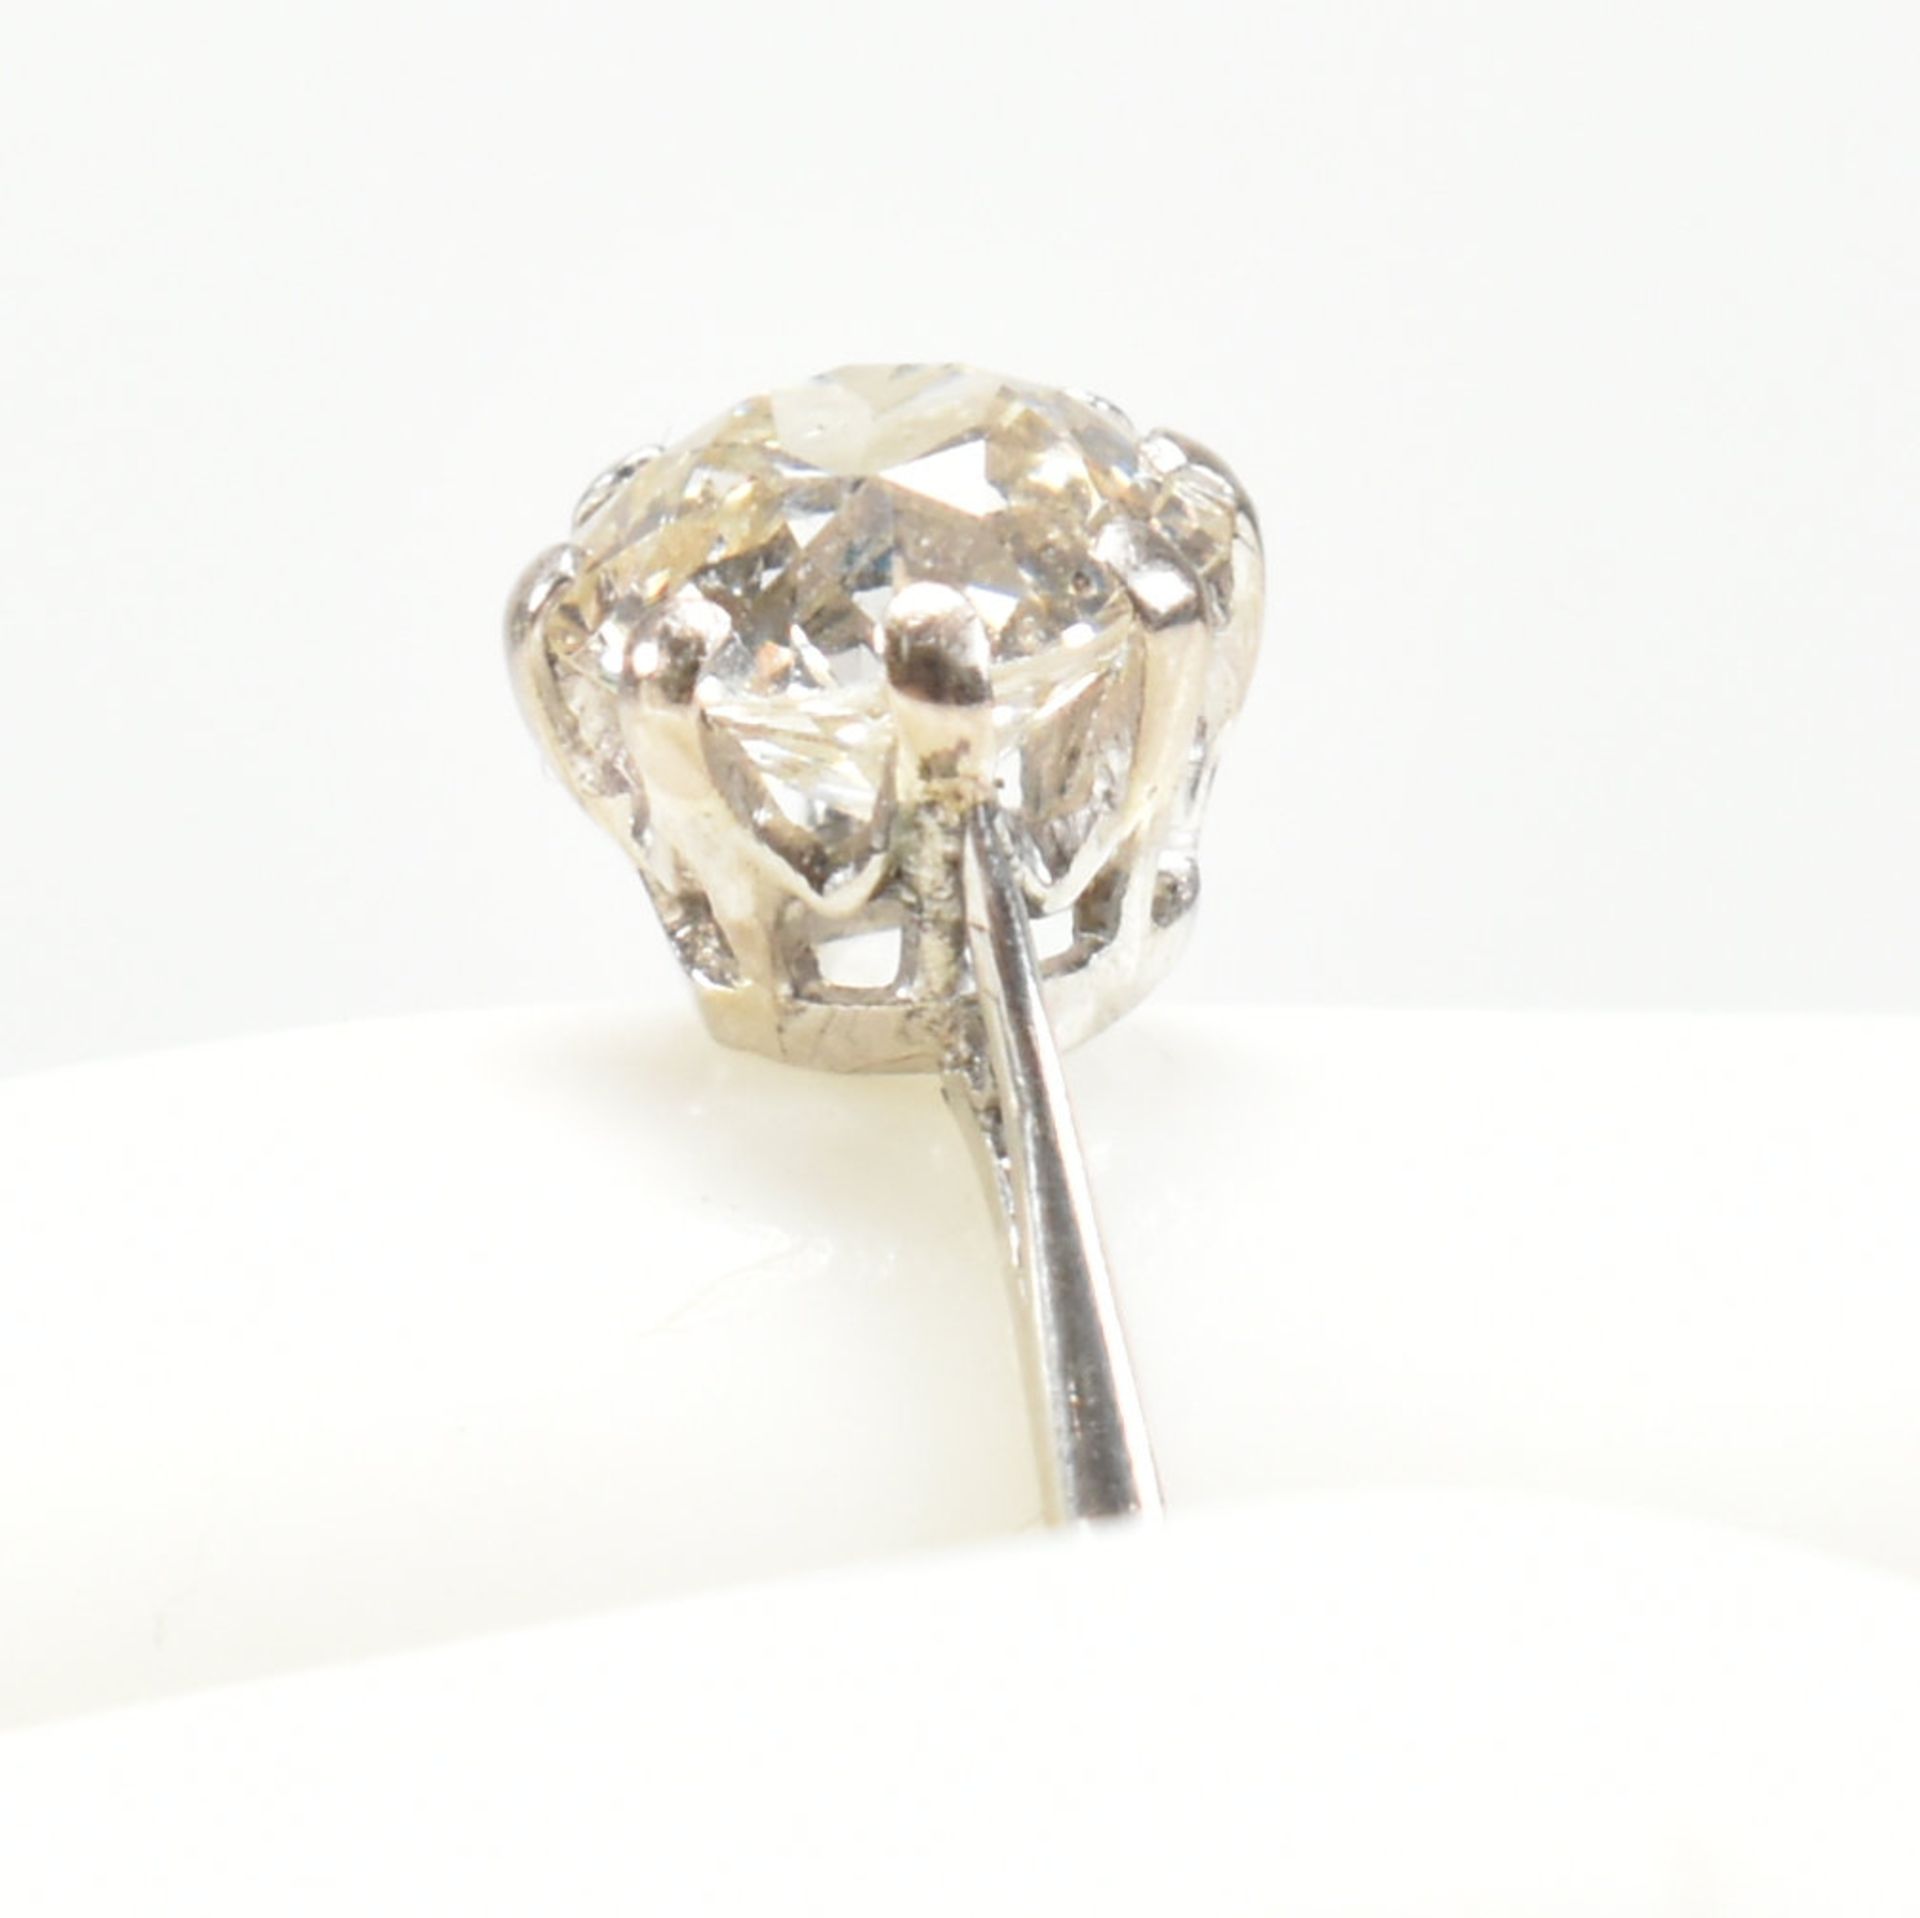 1930S 1.7CT DIAMOND SOLITAIRE RING - Image 9 of 9